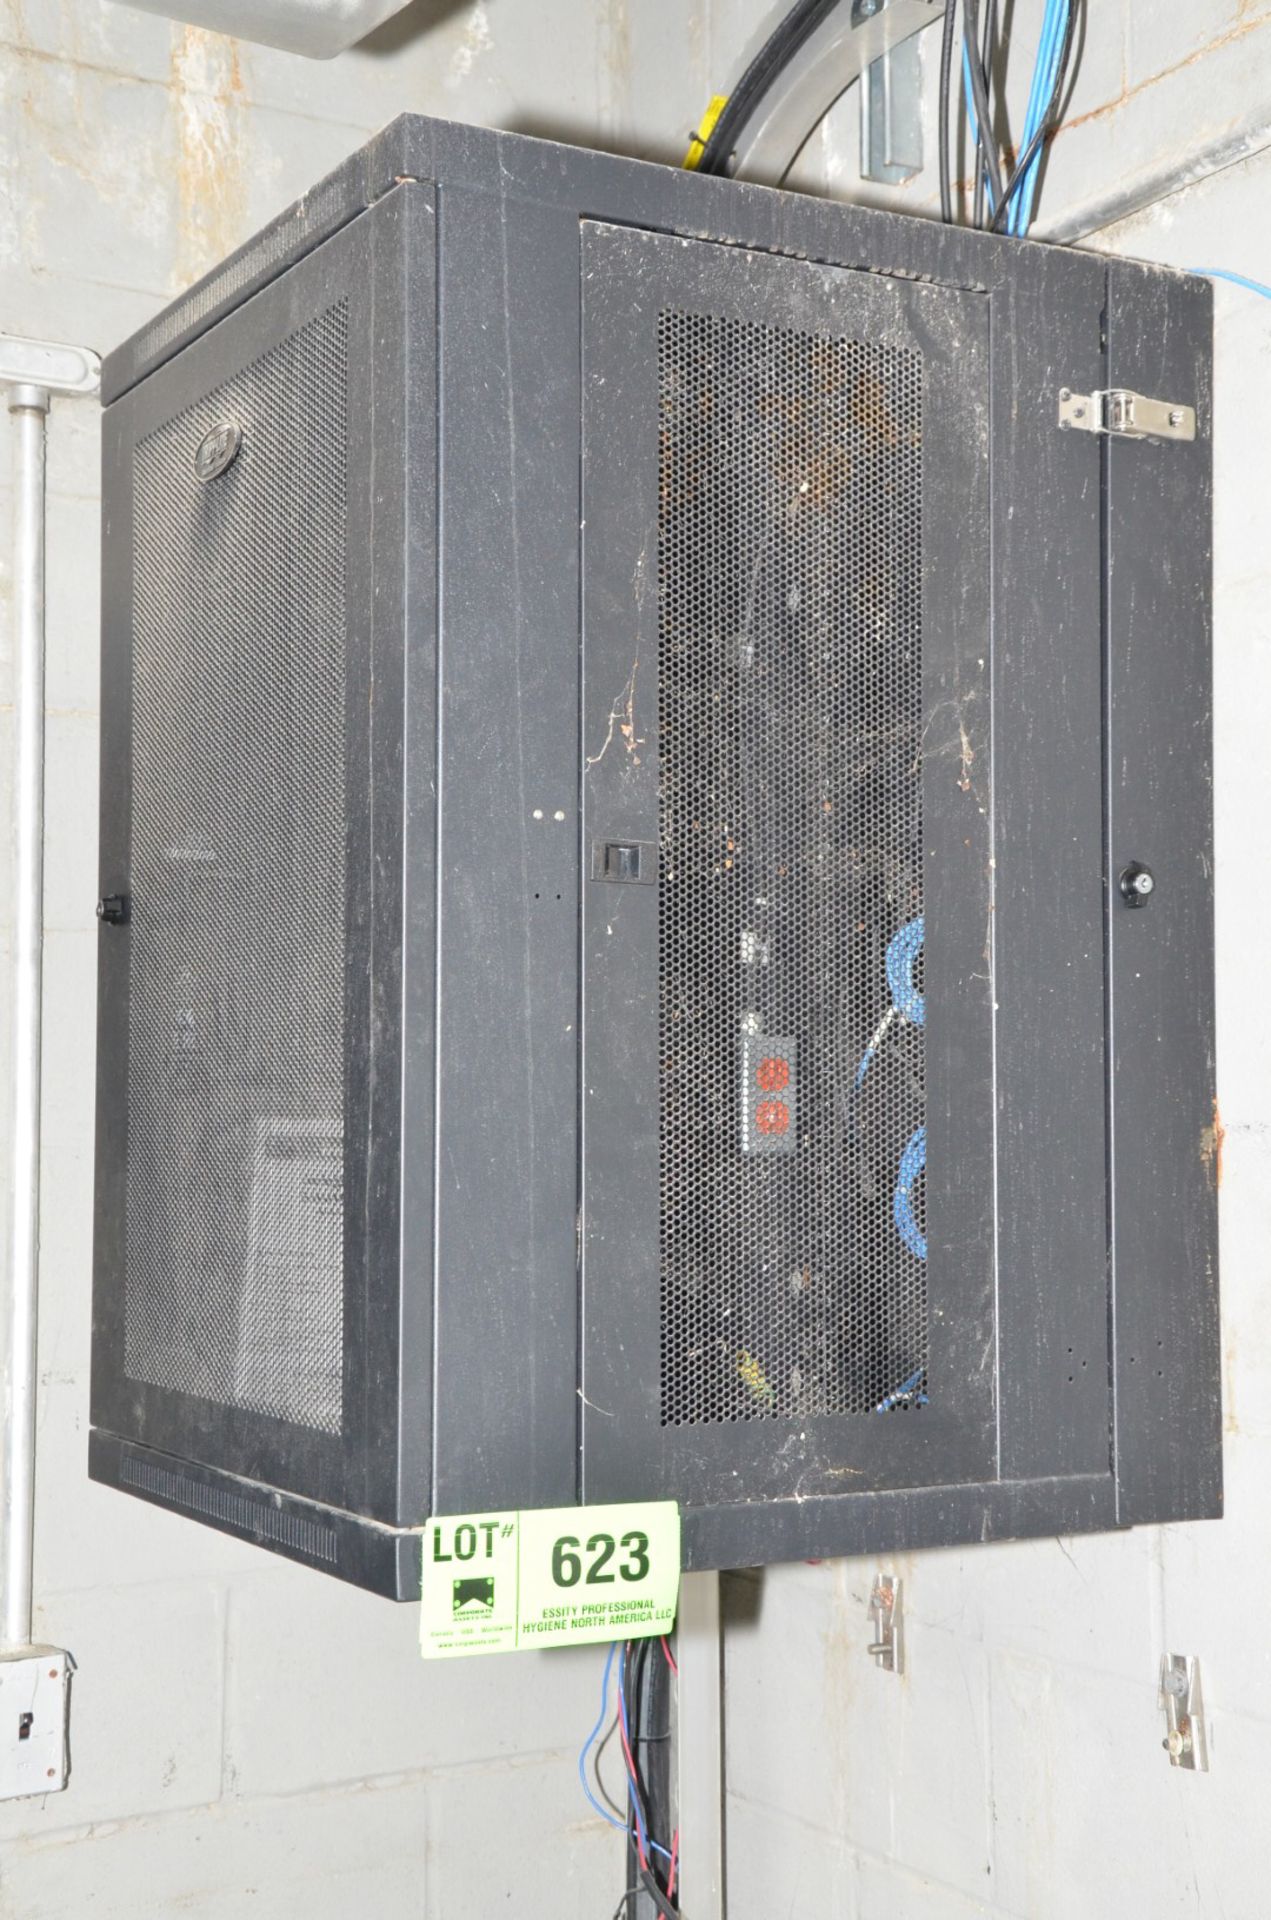 TRIPP LITE SERVER CABINET (CI) [RIGGING FEE FOR LOT #623 - $100 USD PLUS APPLICABLE TAXES]